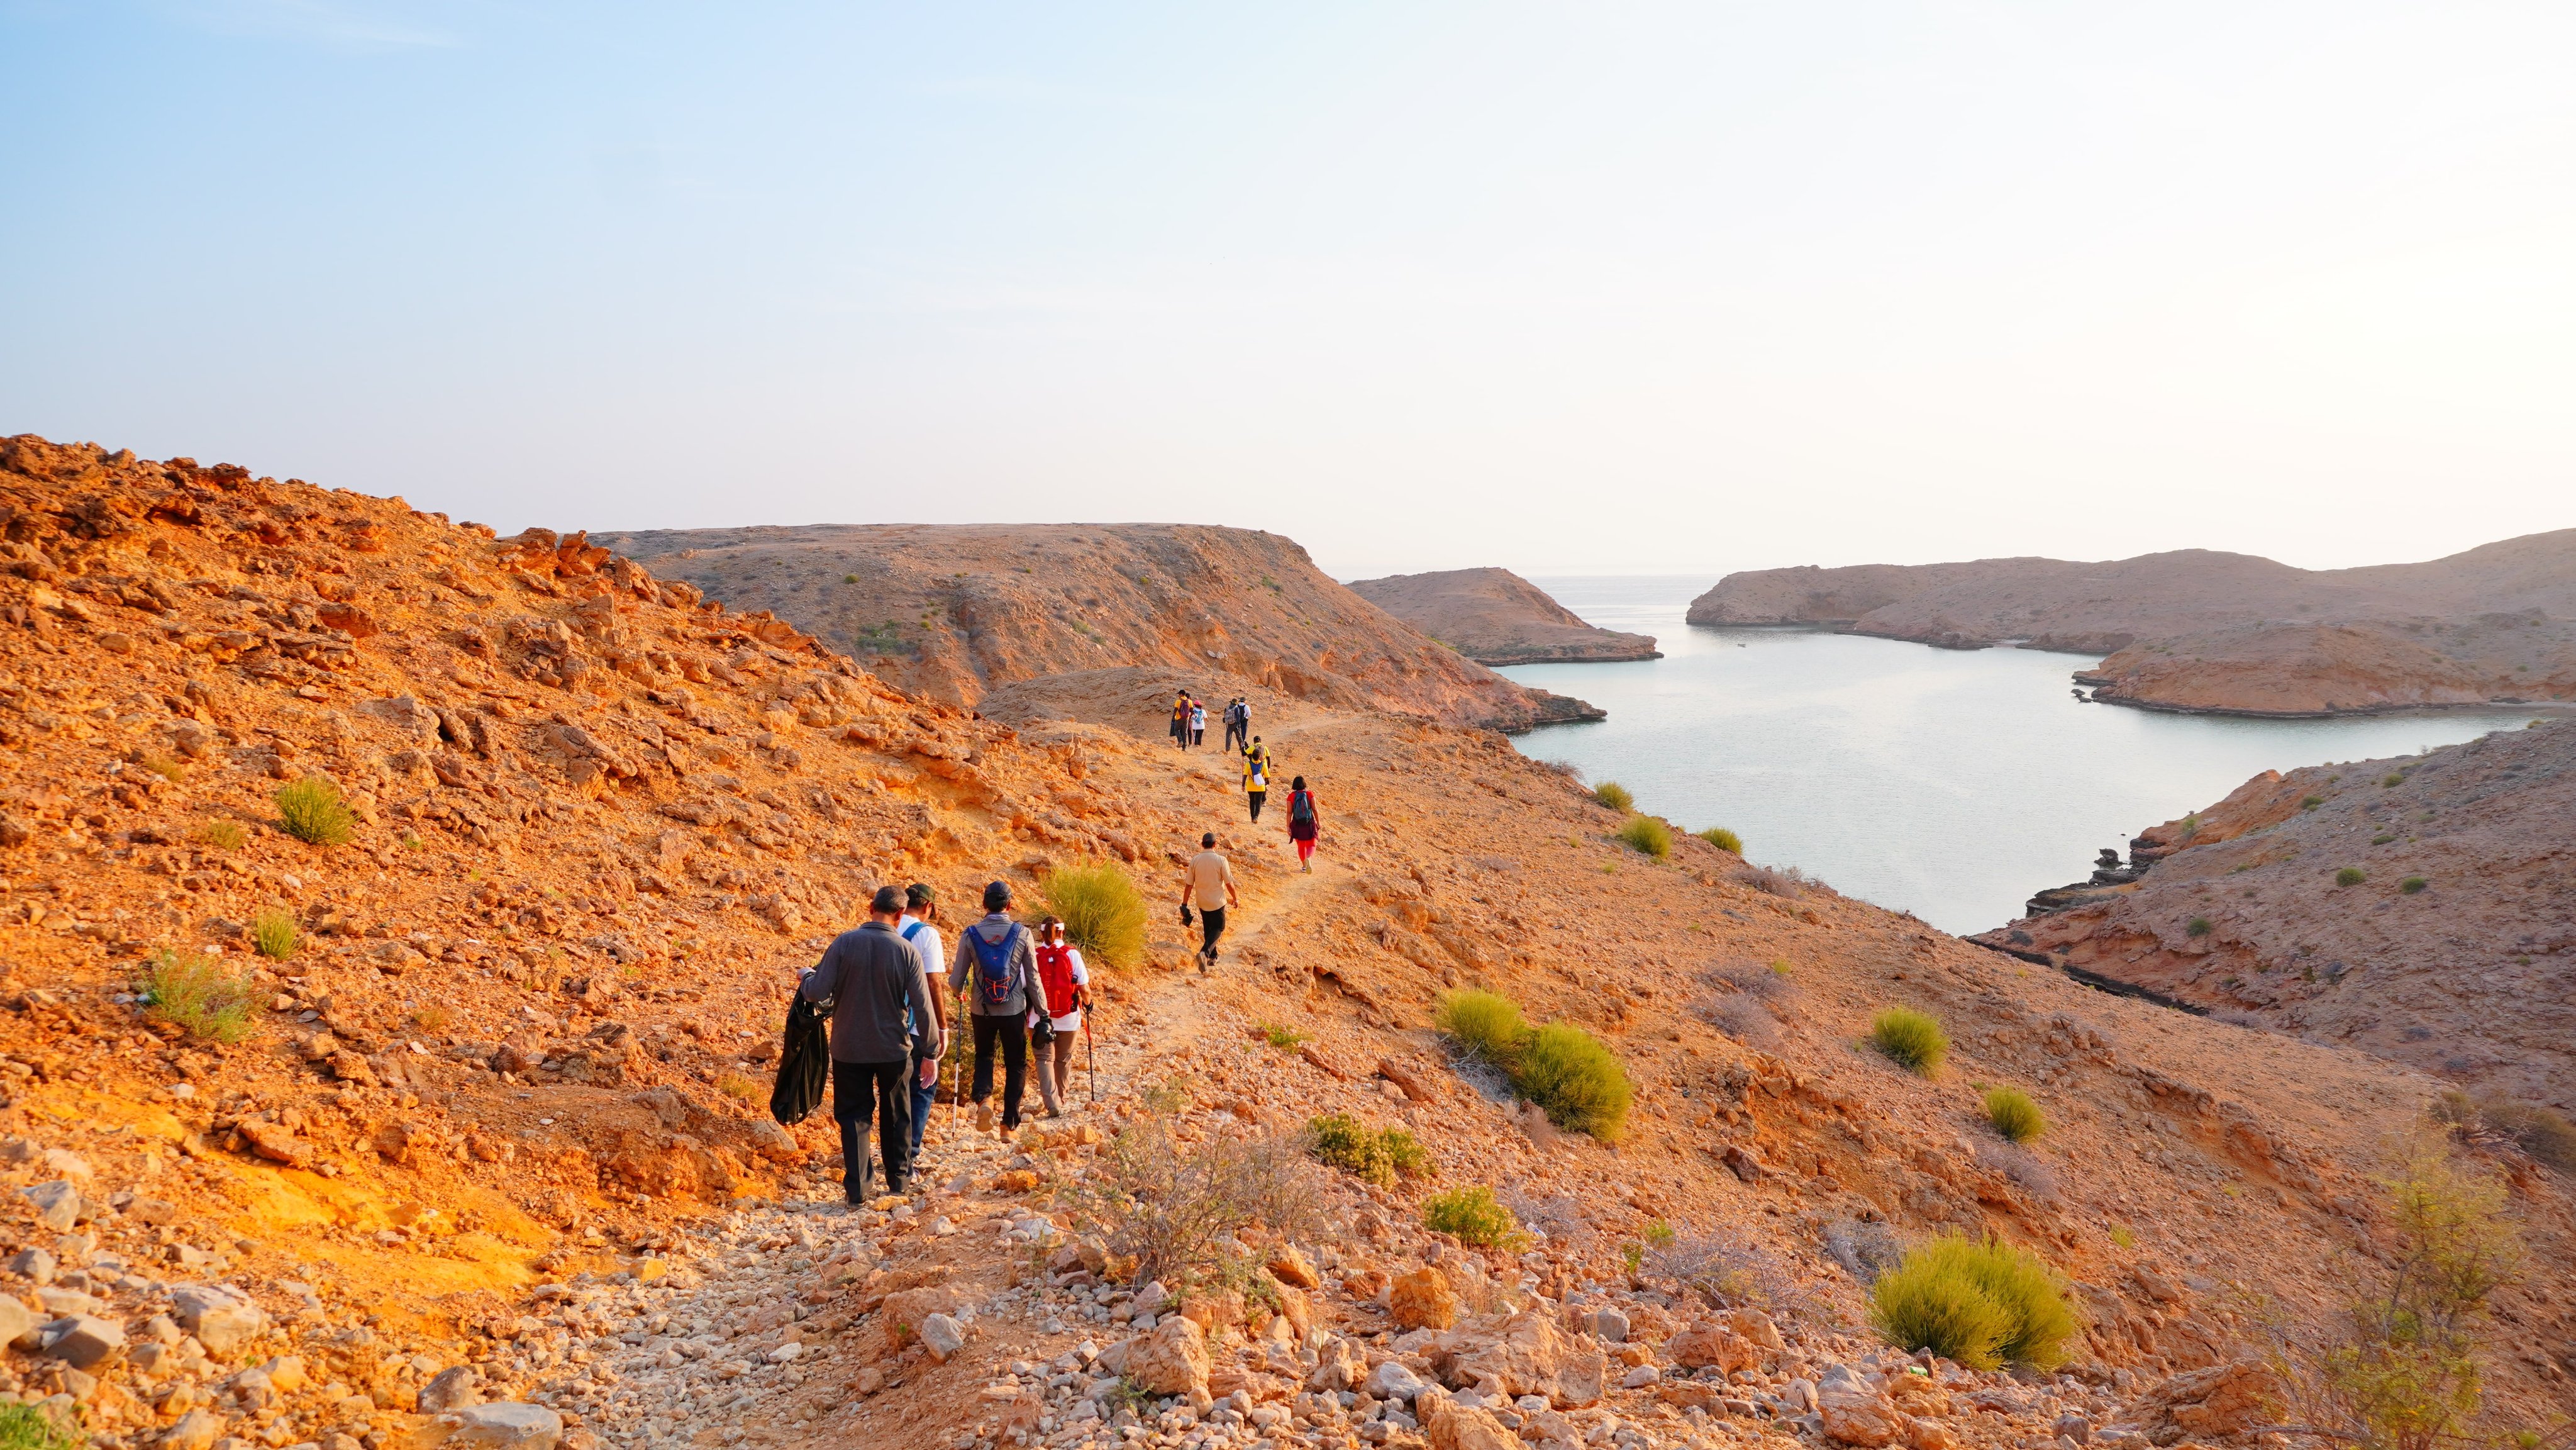 'Hiking for a cleaner Oman' at Muscat, Sohar and Salalah